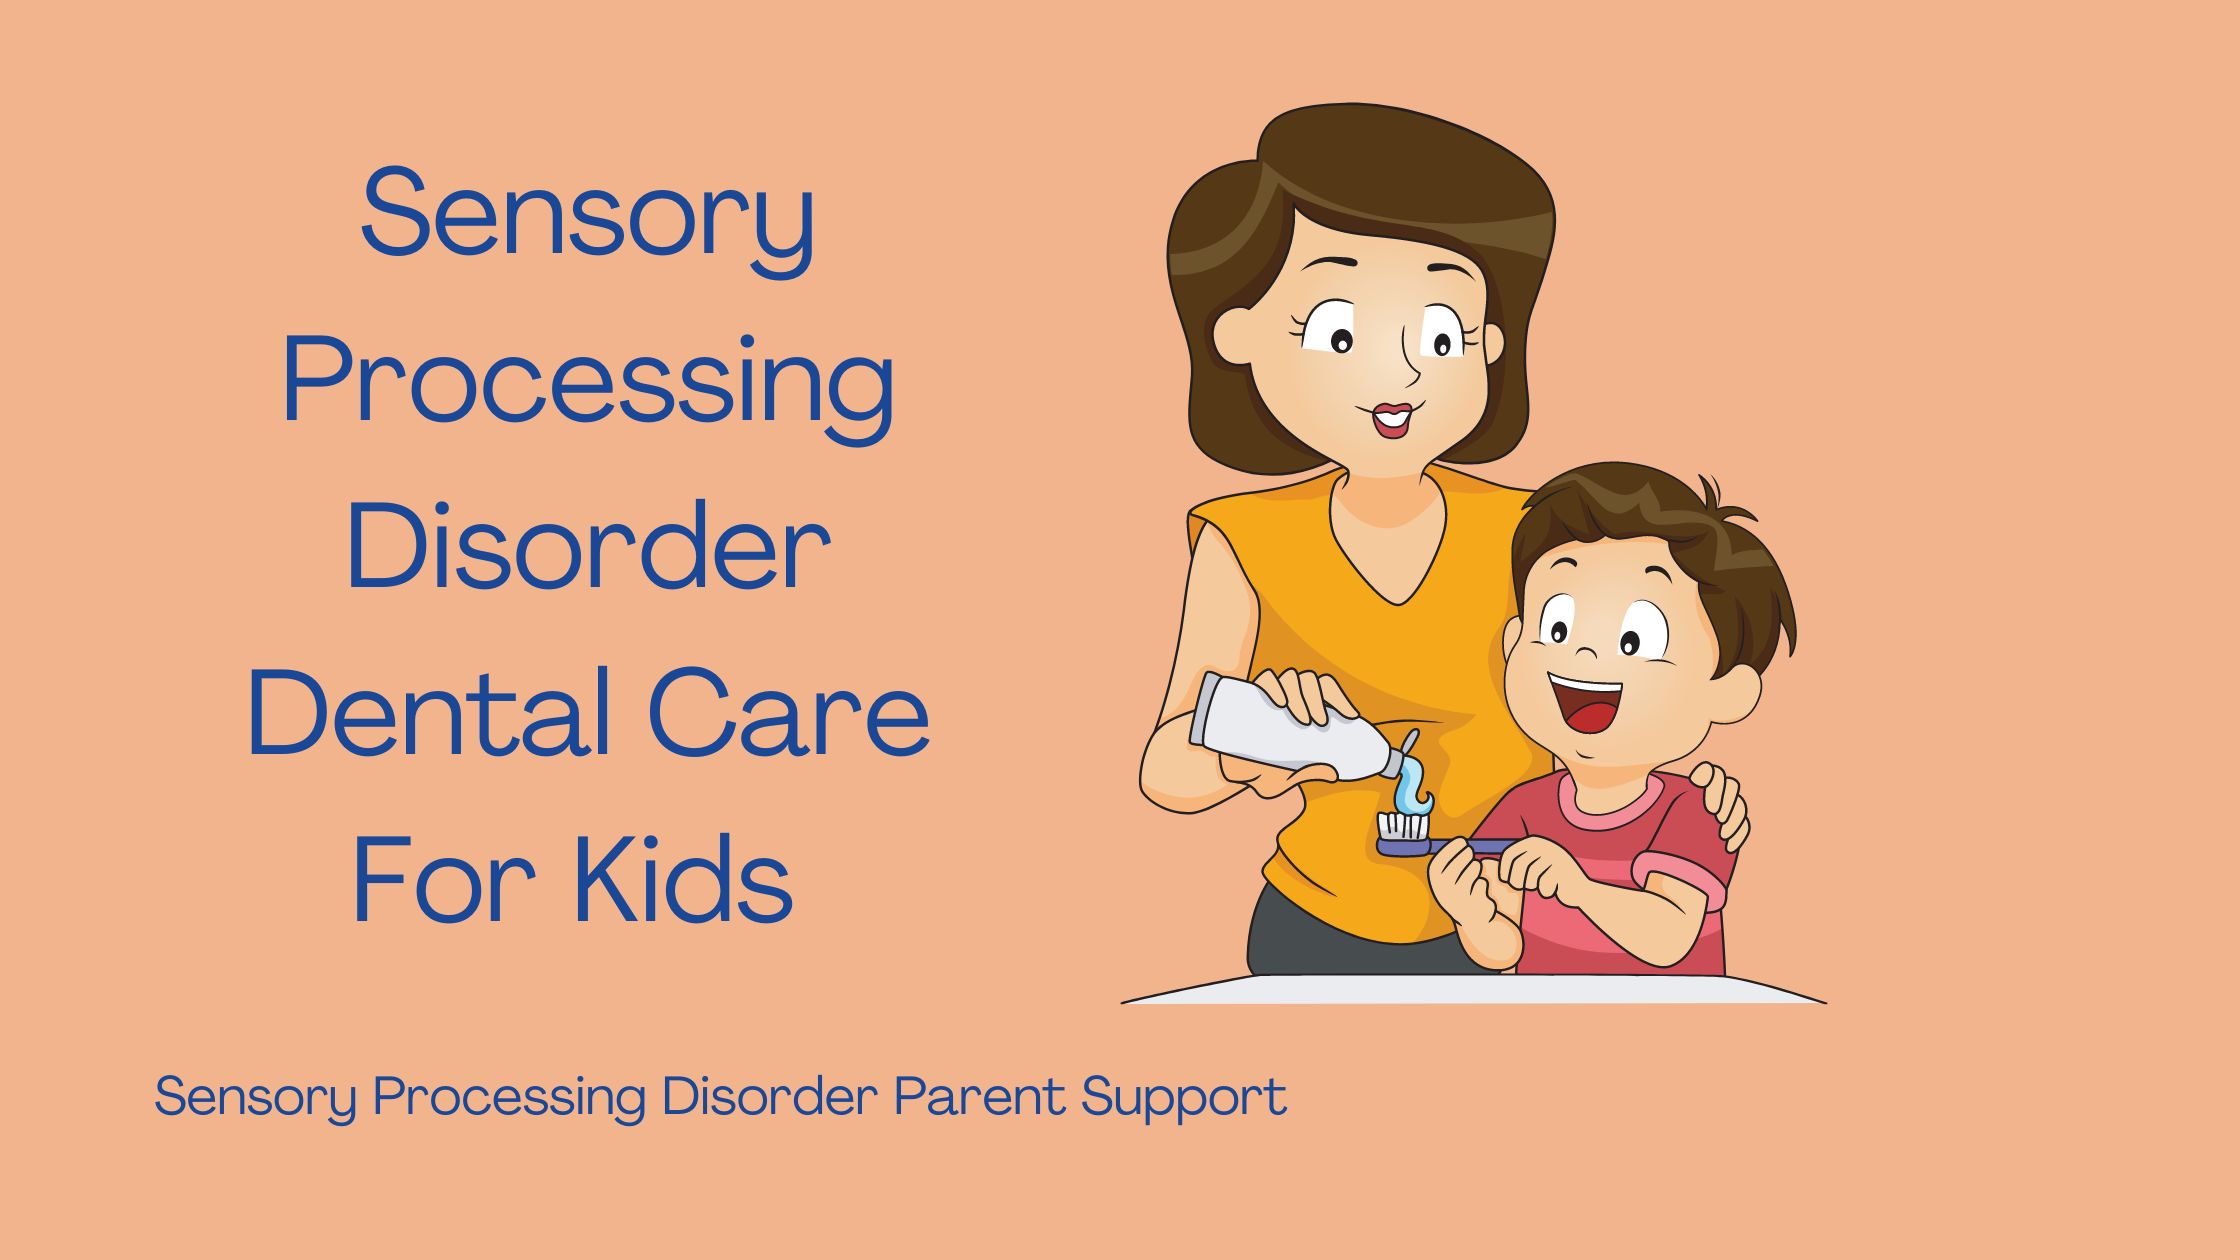 boy with sensory processing disorder brushing his teeth with his mom Sensory Processing Disorder Dental Care For Kids